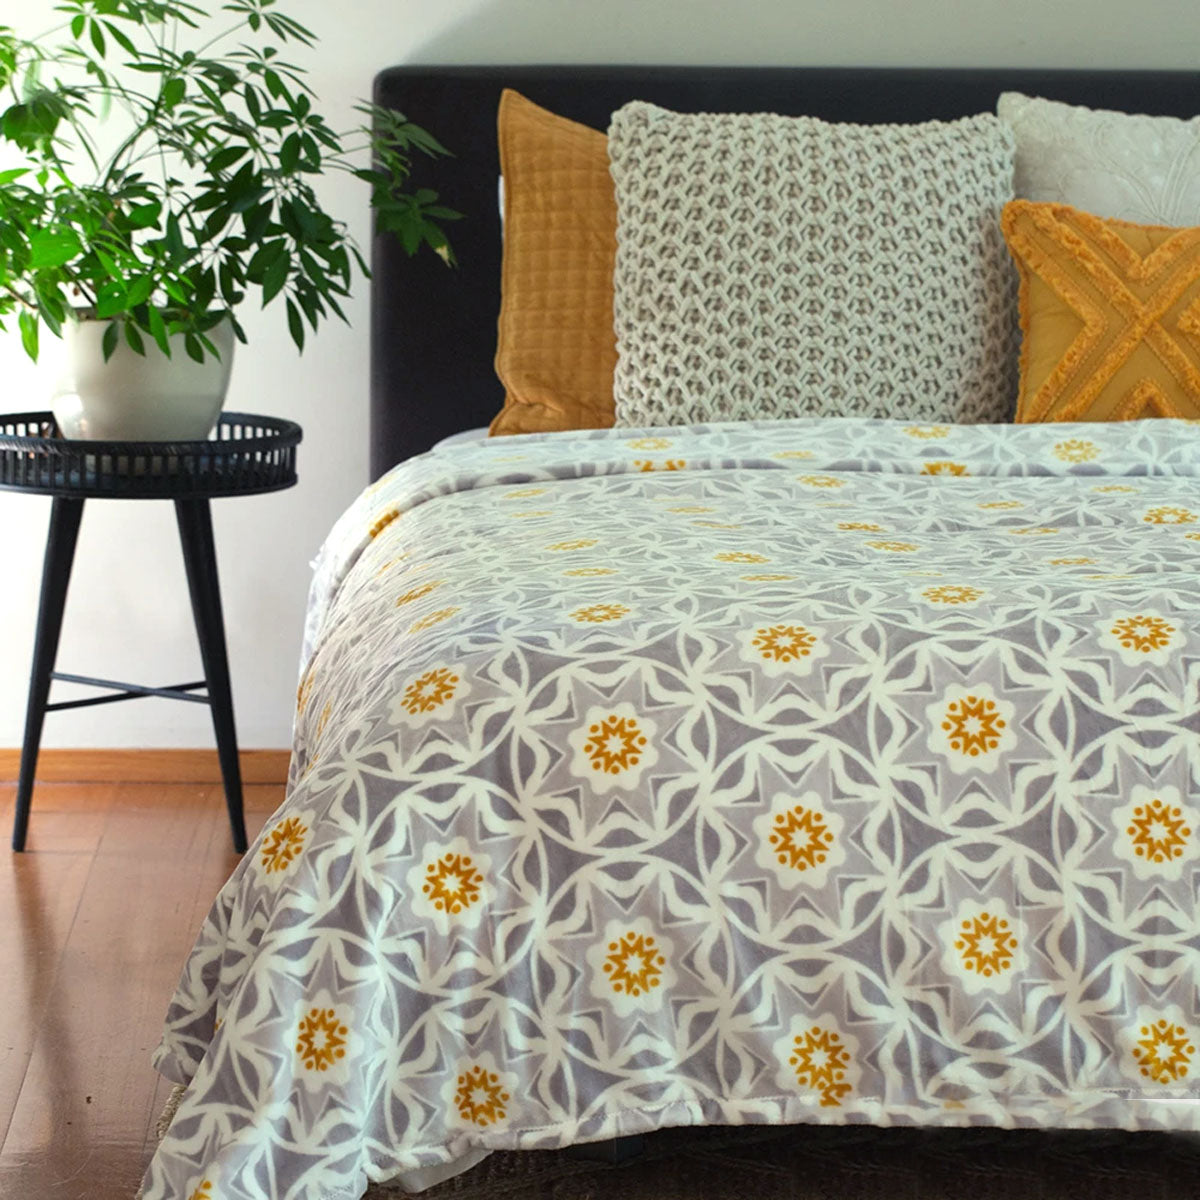 A sacred geometry style of circle and 5 interlinked eight pointed star design in grey and white with an orange center burst on a bed spread or doona on a bed with a little table in a bedroom setting.